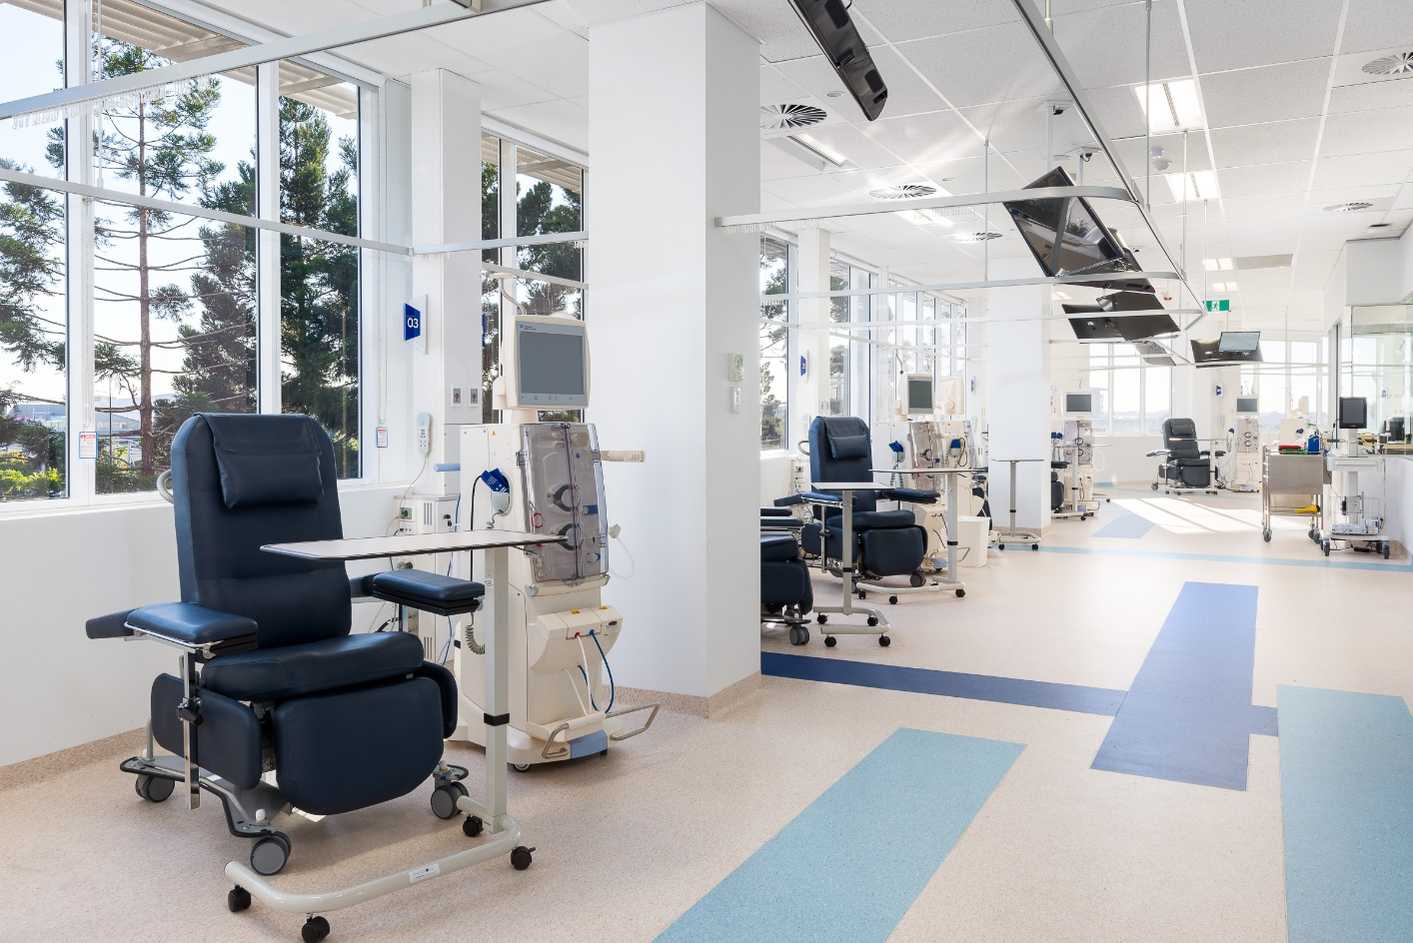 Find a Fresenius Kidney Care dialysis centre near you